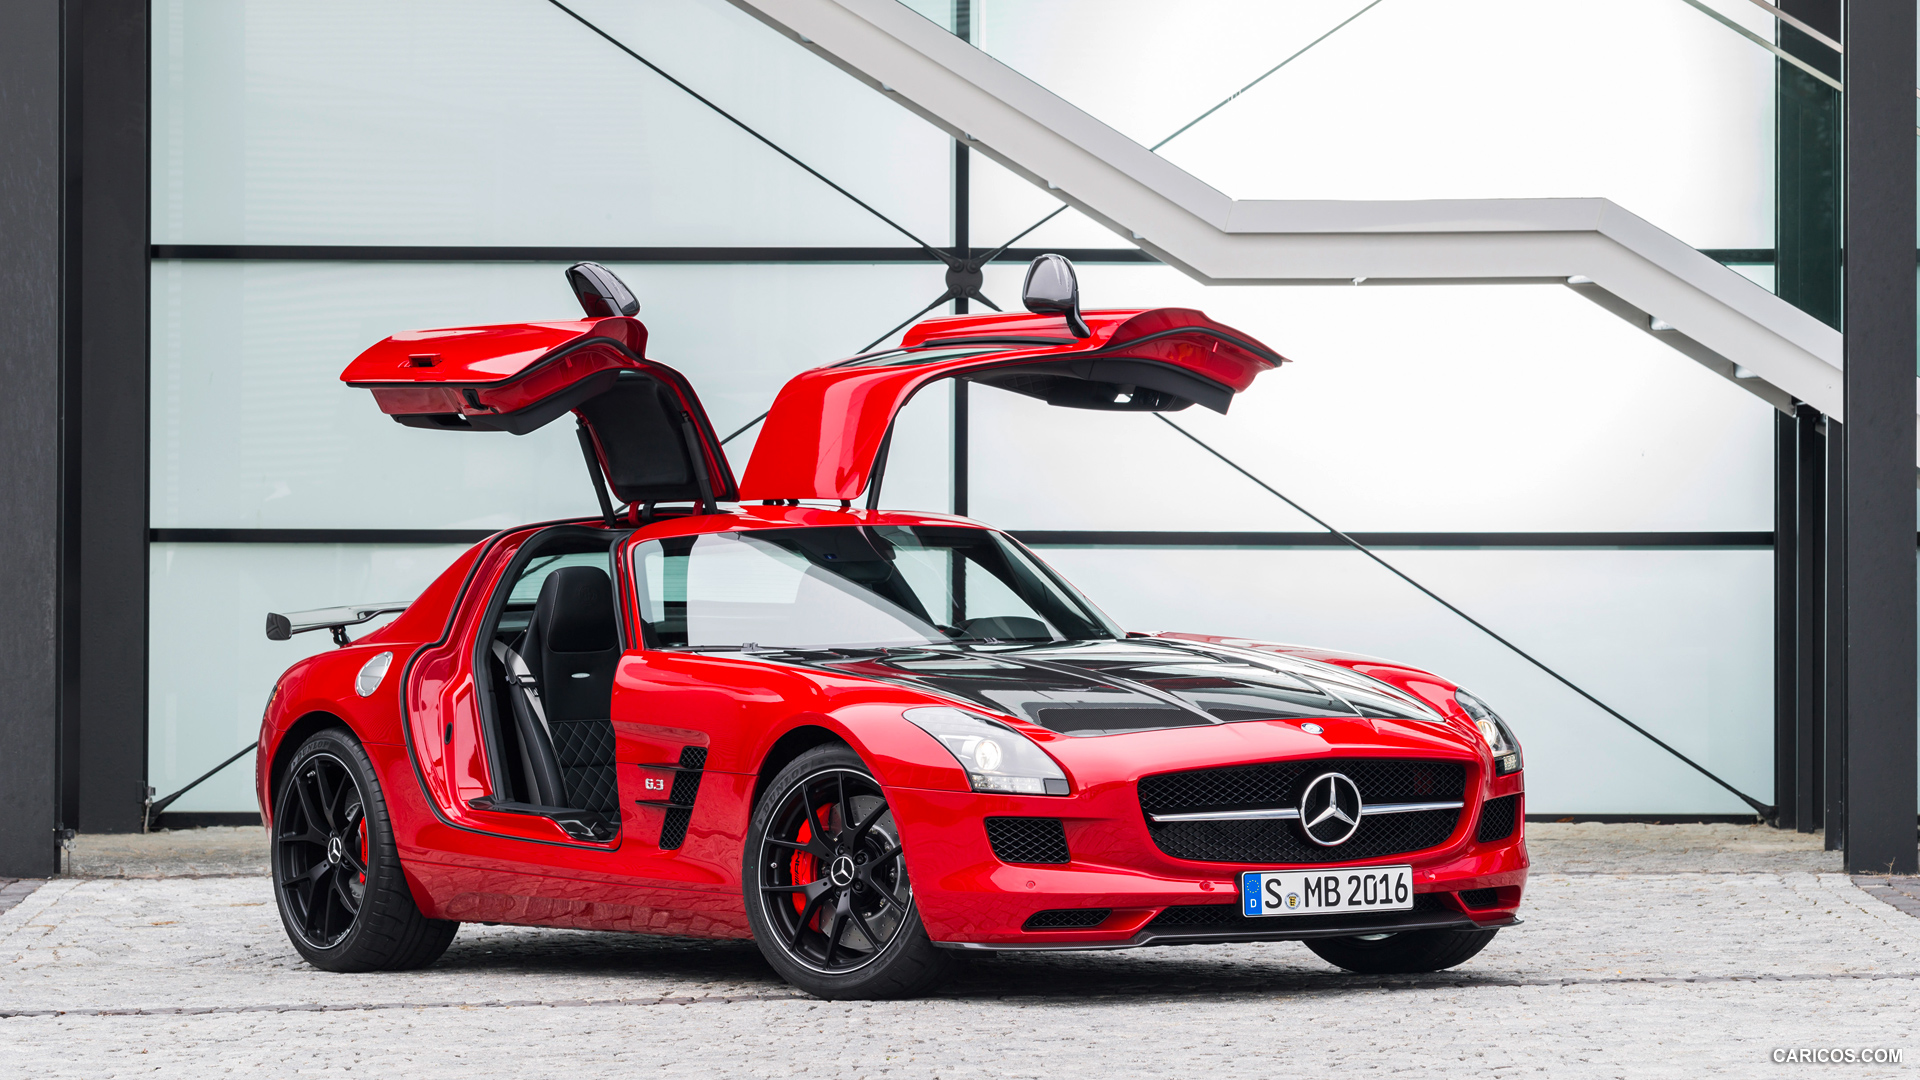  2015 Mercedes-Benz SLS AMG GT Coupe Final Edition - Front, #7 of 41